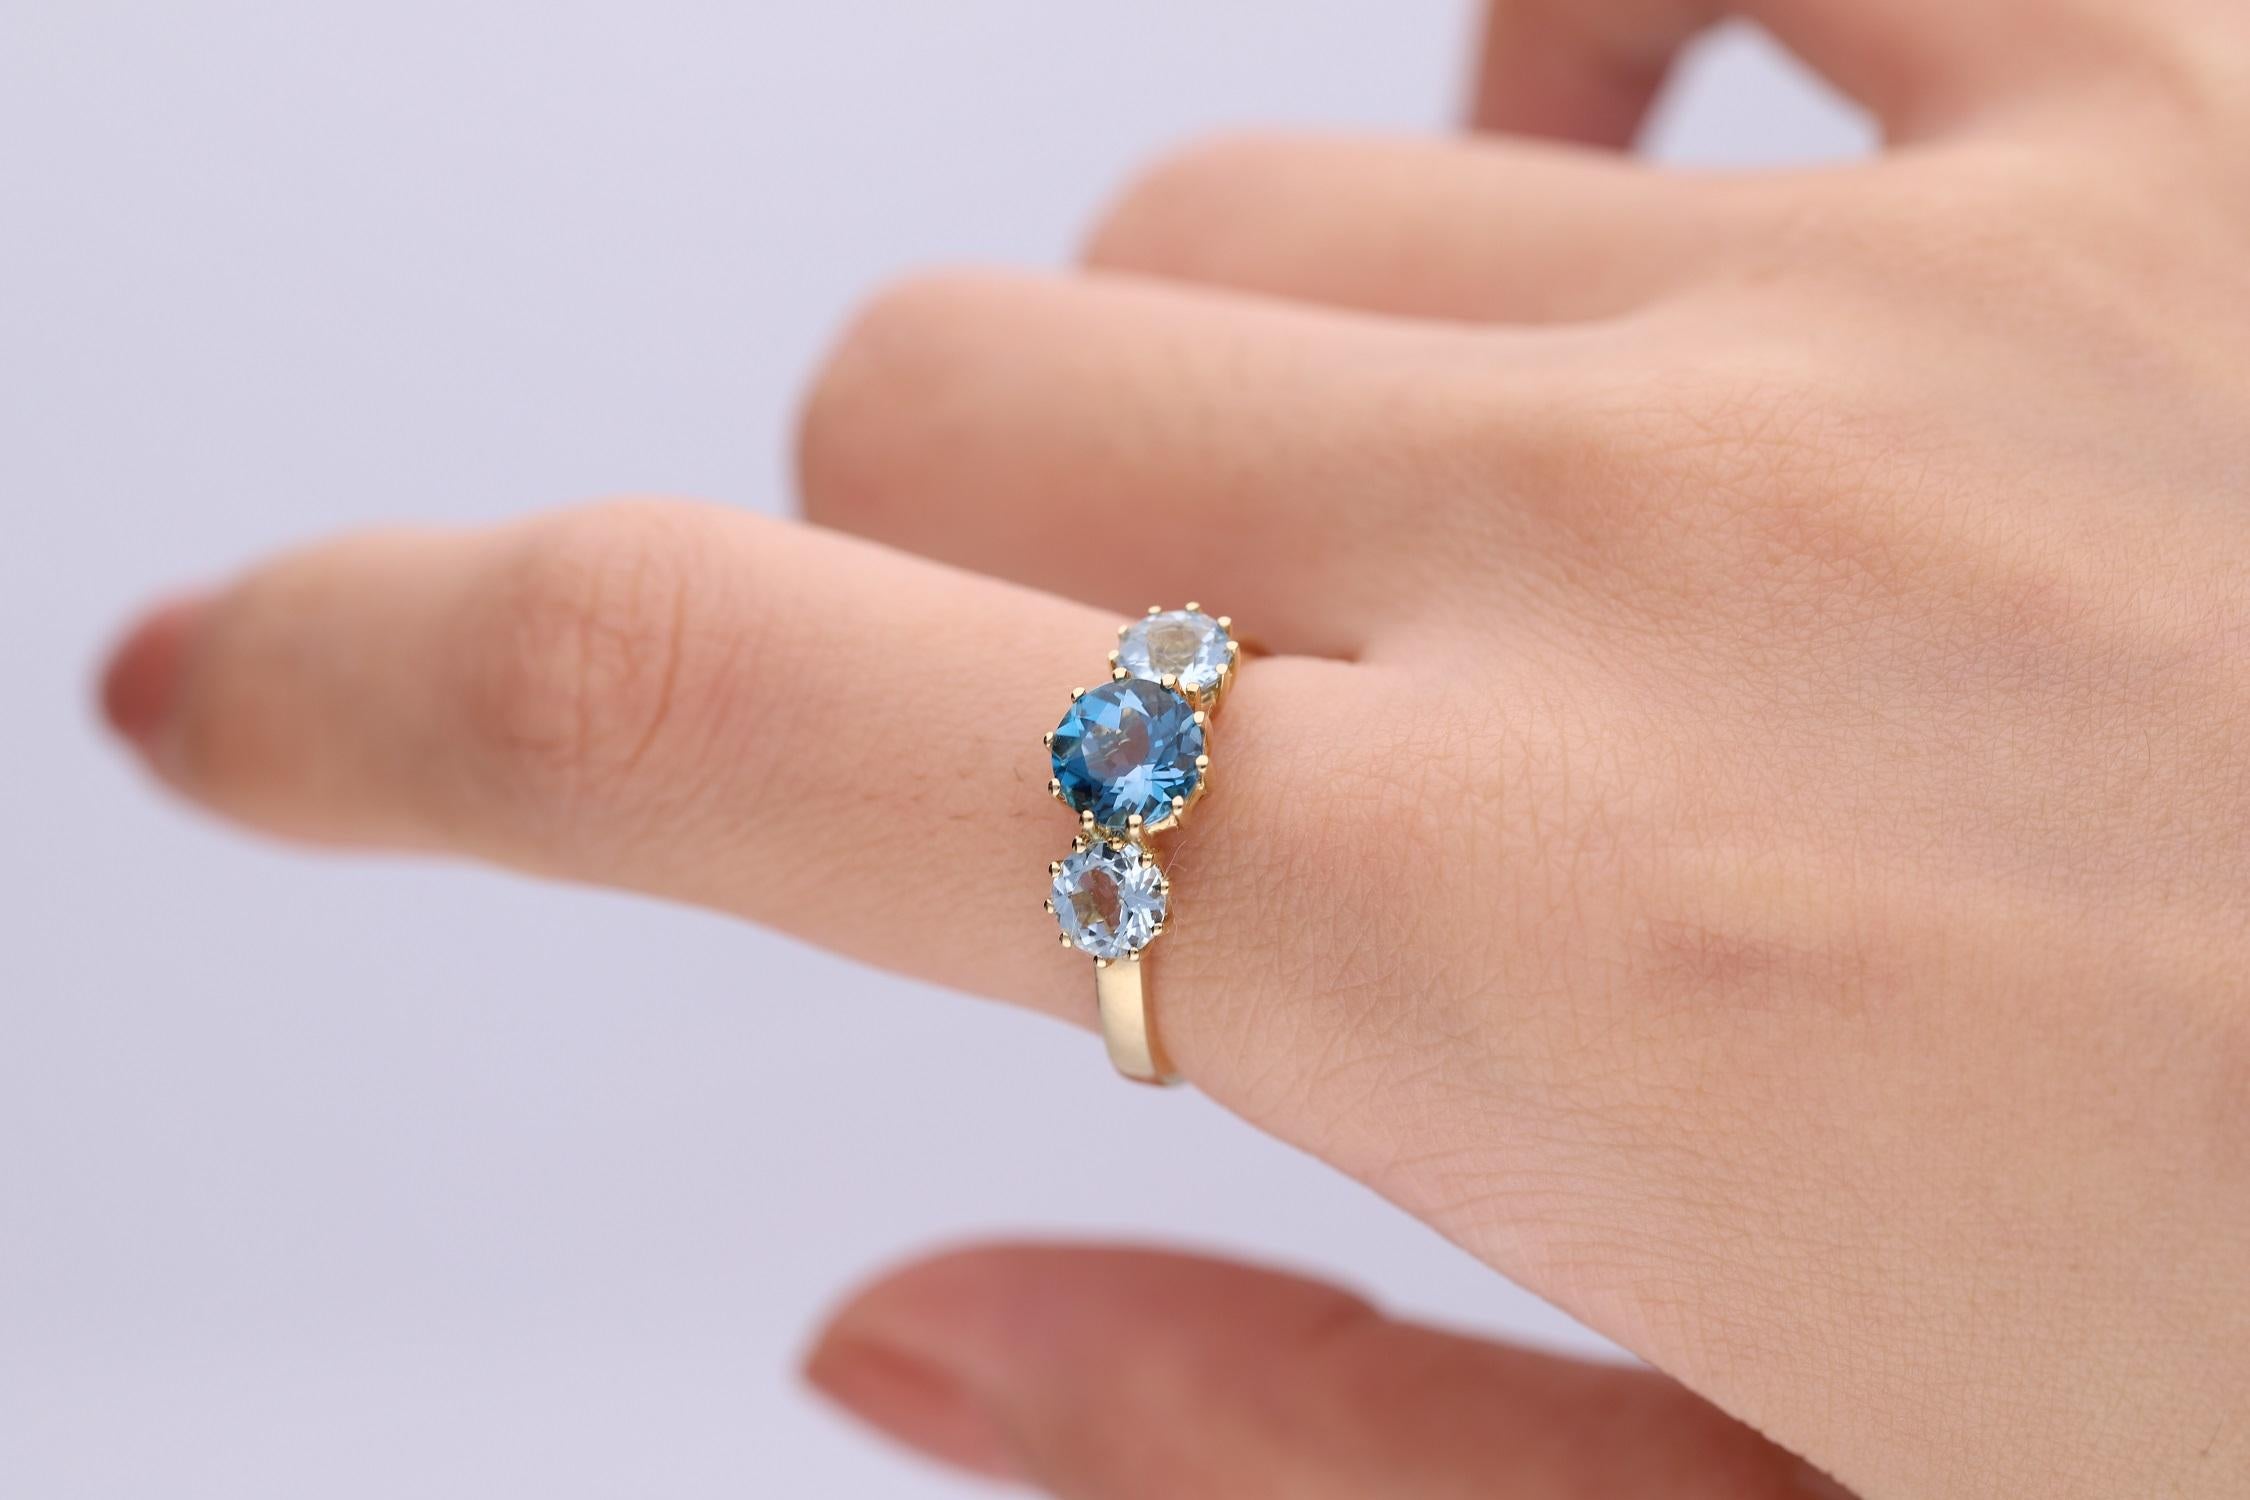 Stunning, timeless and classy eternity Unique ring. Decorate yourself in luxury with this Gin & Grace ring. This ring is made up of Round-Cut Prong Setting London Blue Topaz (1pcs) 1.35 Carat and Round-Cut Prong Setting Aquamarine (2pcs) 0.94 Carat